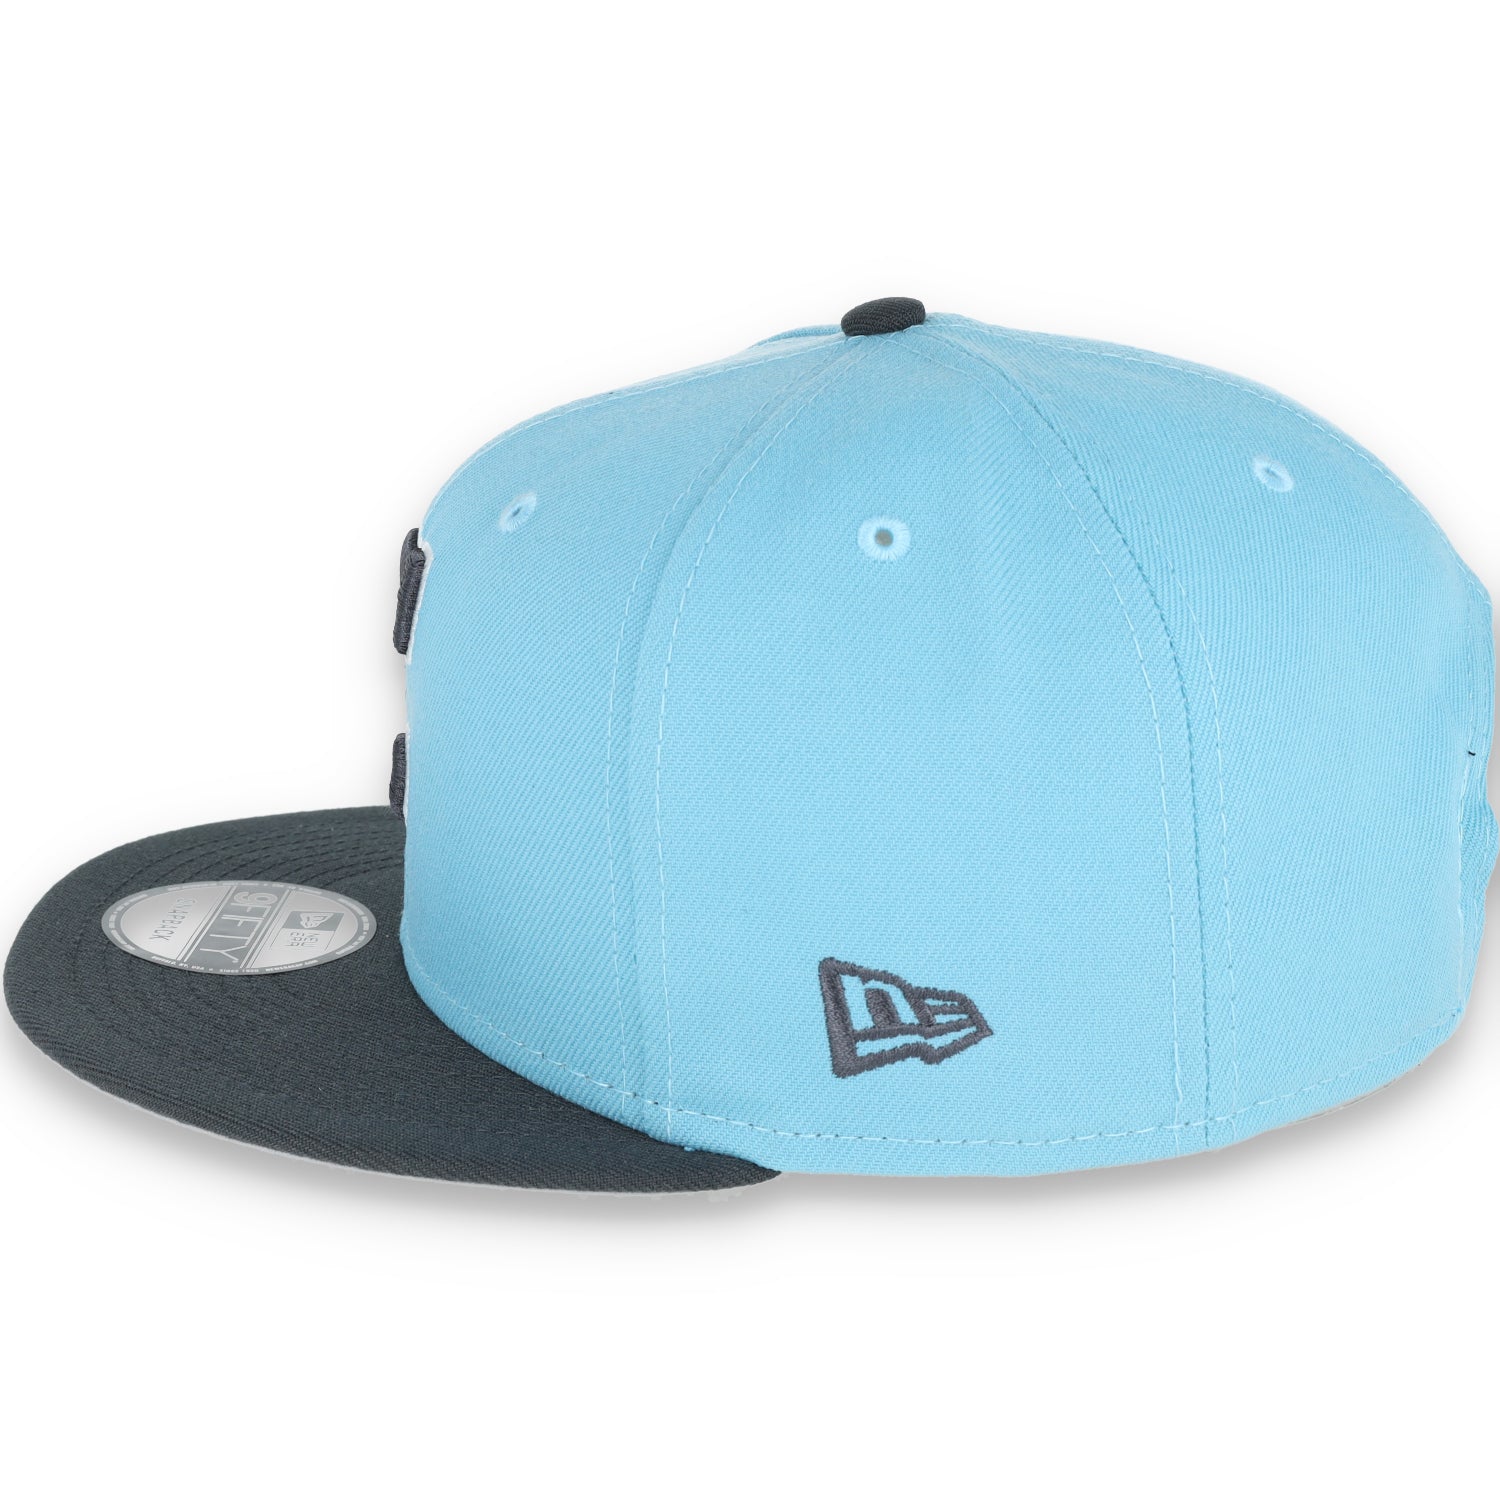 NEW ERA CLEVELAND INDIANS 9FIFTY COLOR PACK SNAPBACK-BLUE